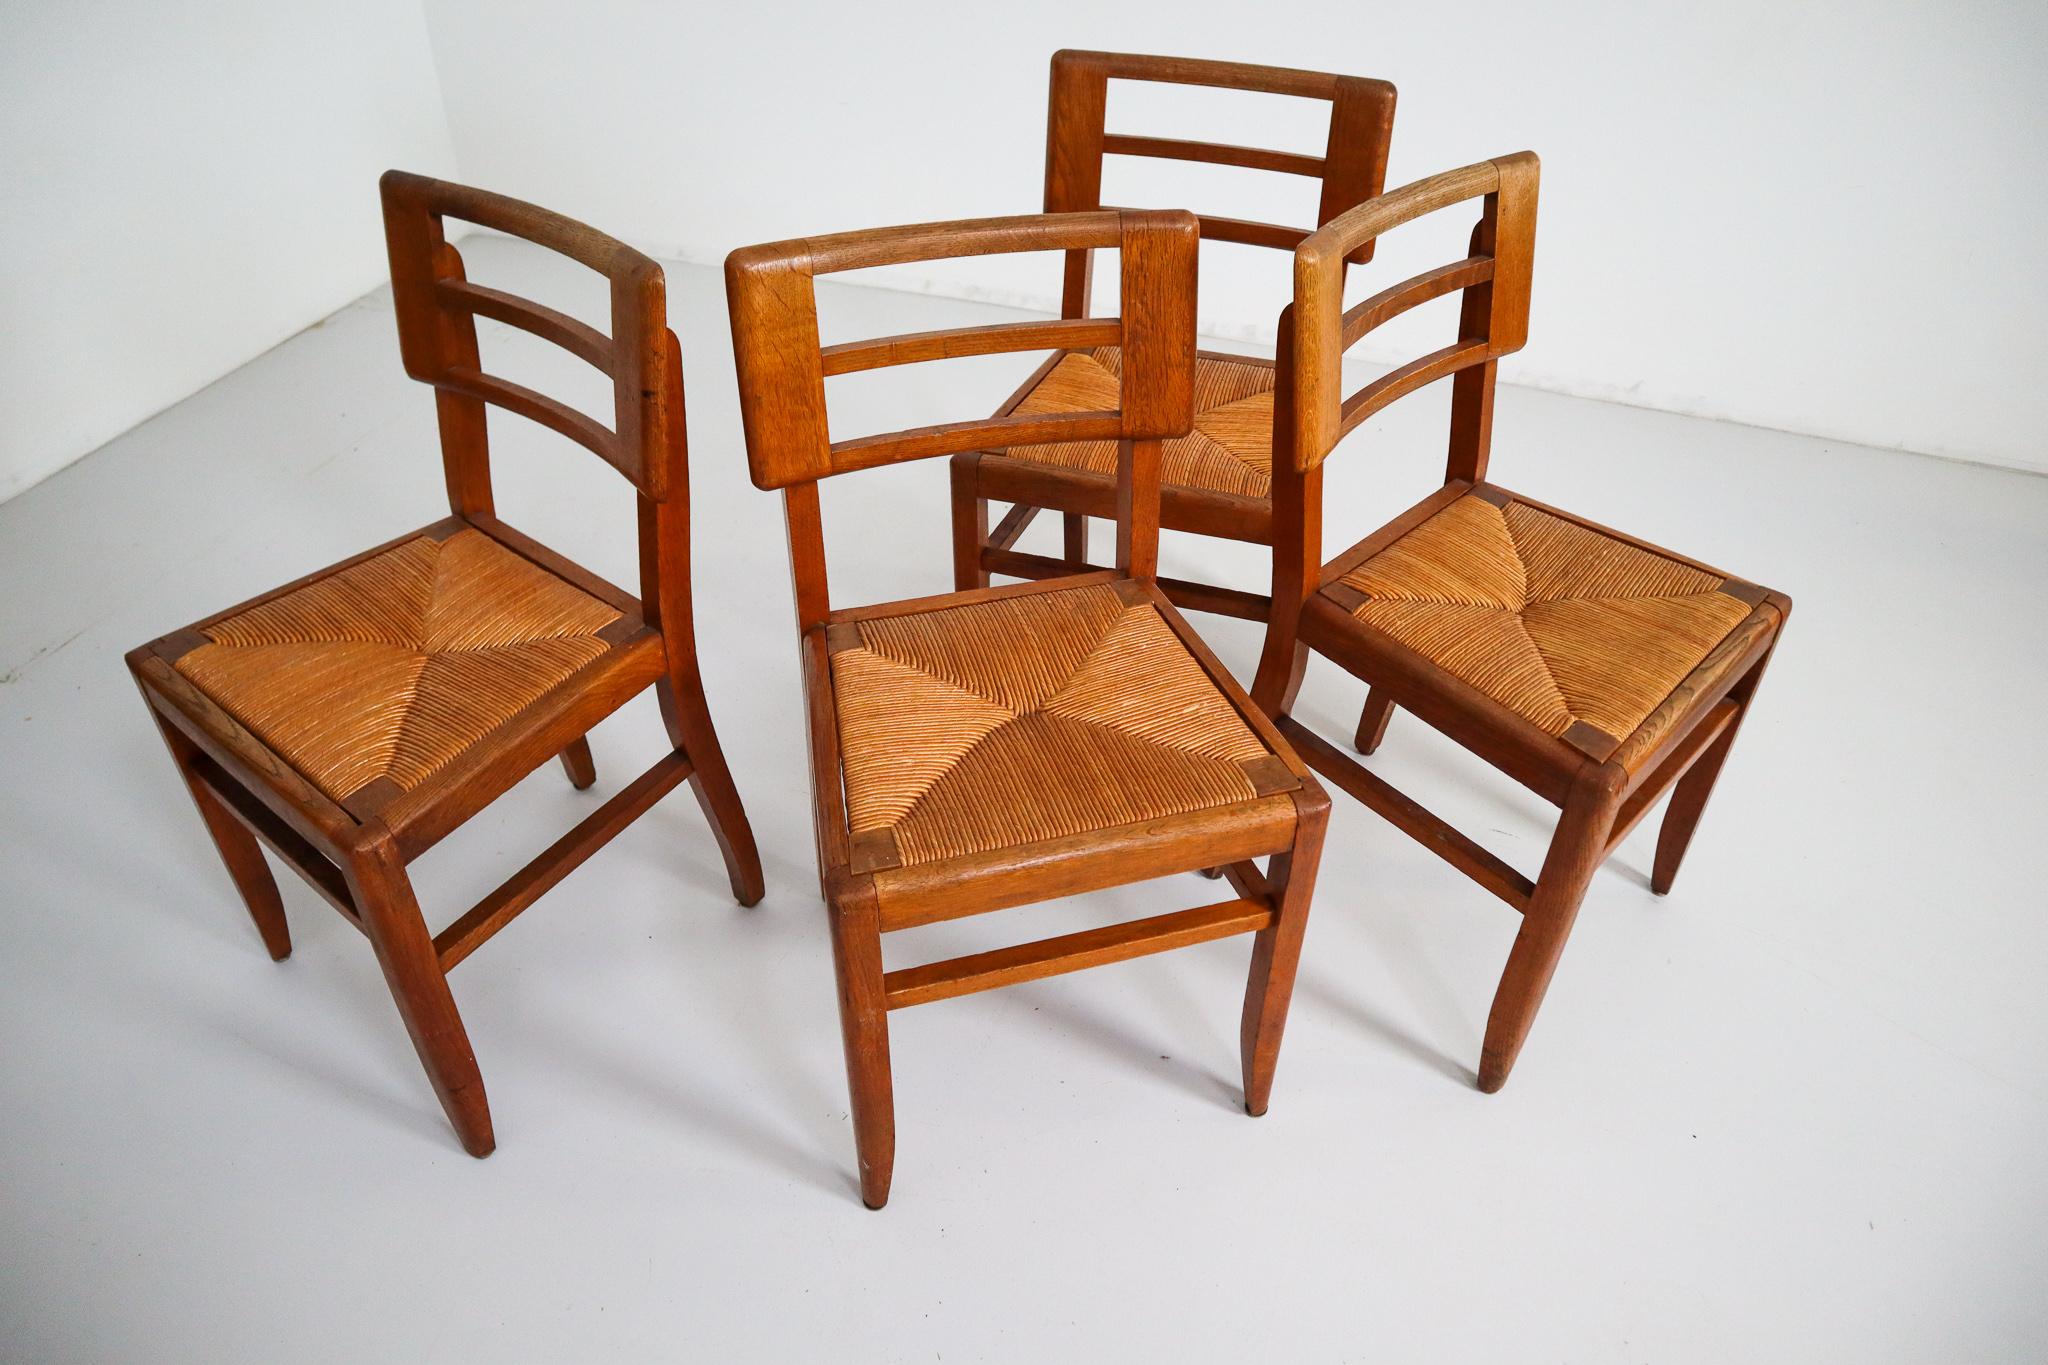 Modernist set of four chairs by designer Pierre Cruege made in France, 1940s. These models feature a sturdy backrest, consisting of wooden elements connected to each other by four slats. The seat is executed in woven cane. Works by French designer